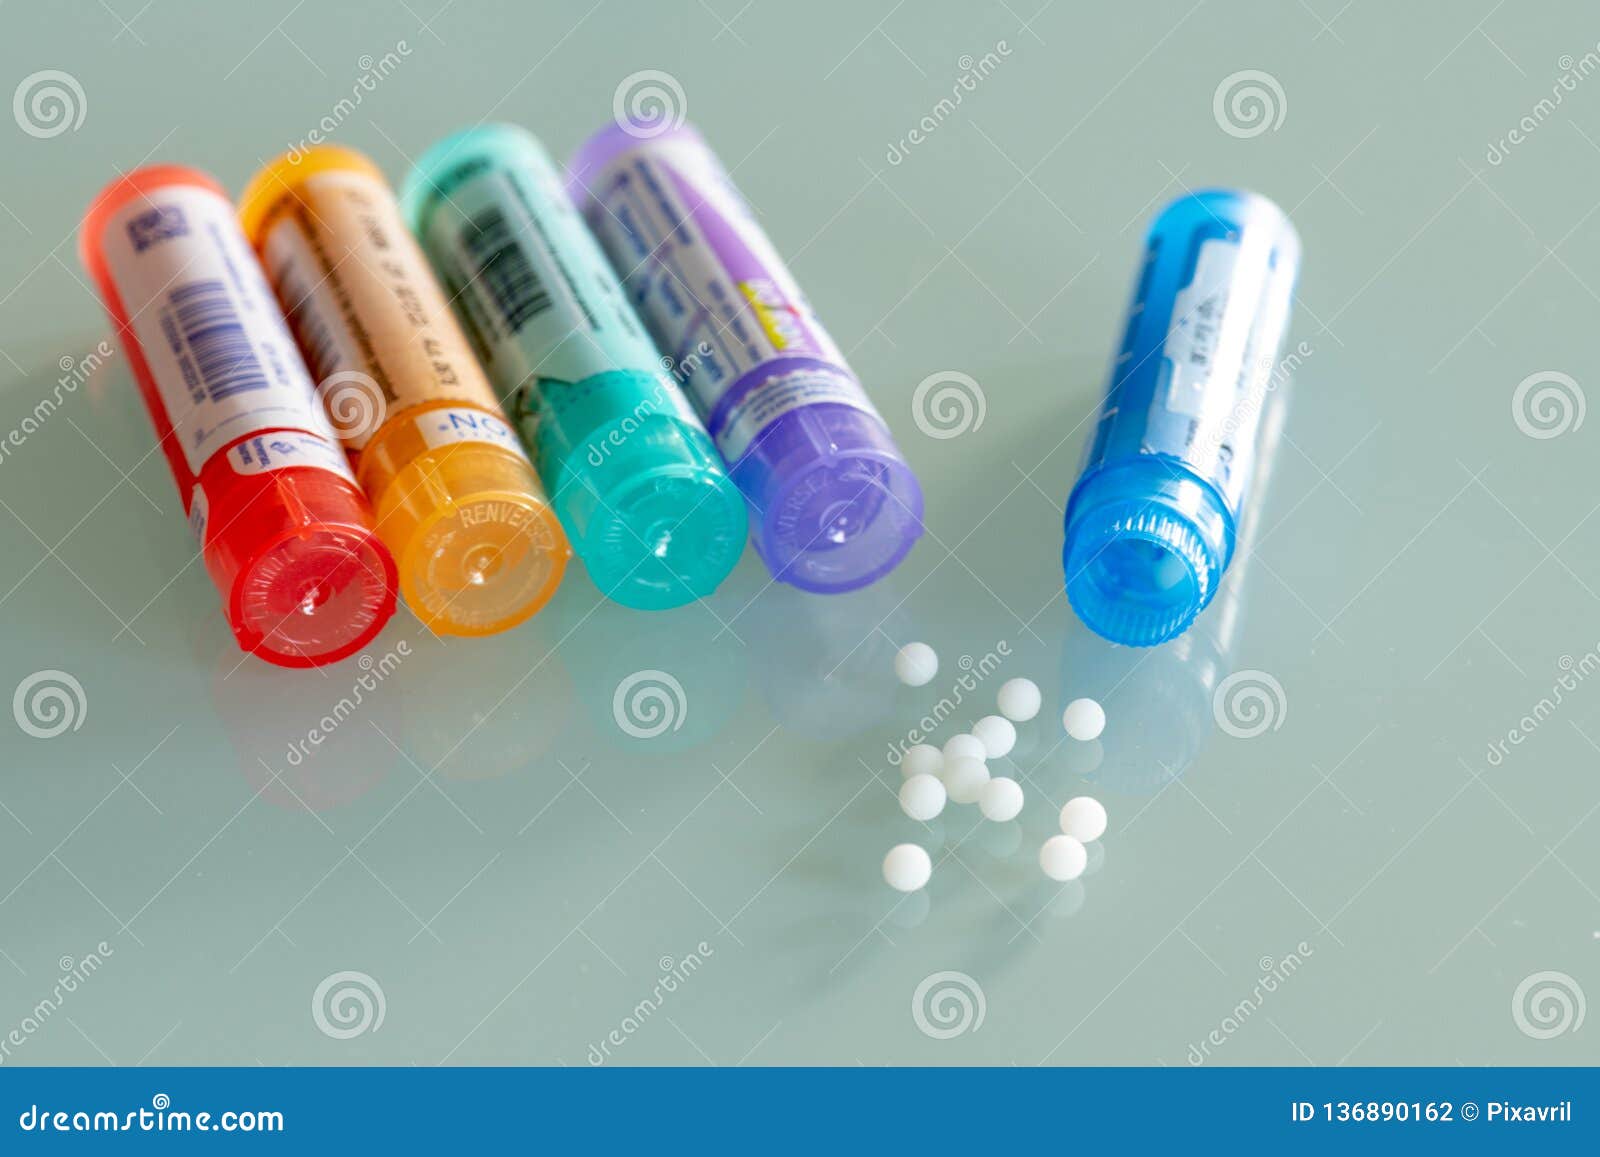 homeopathic globules scattered around with their colored containers